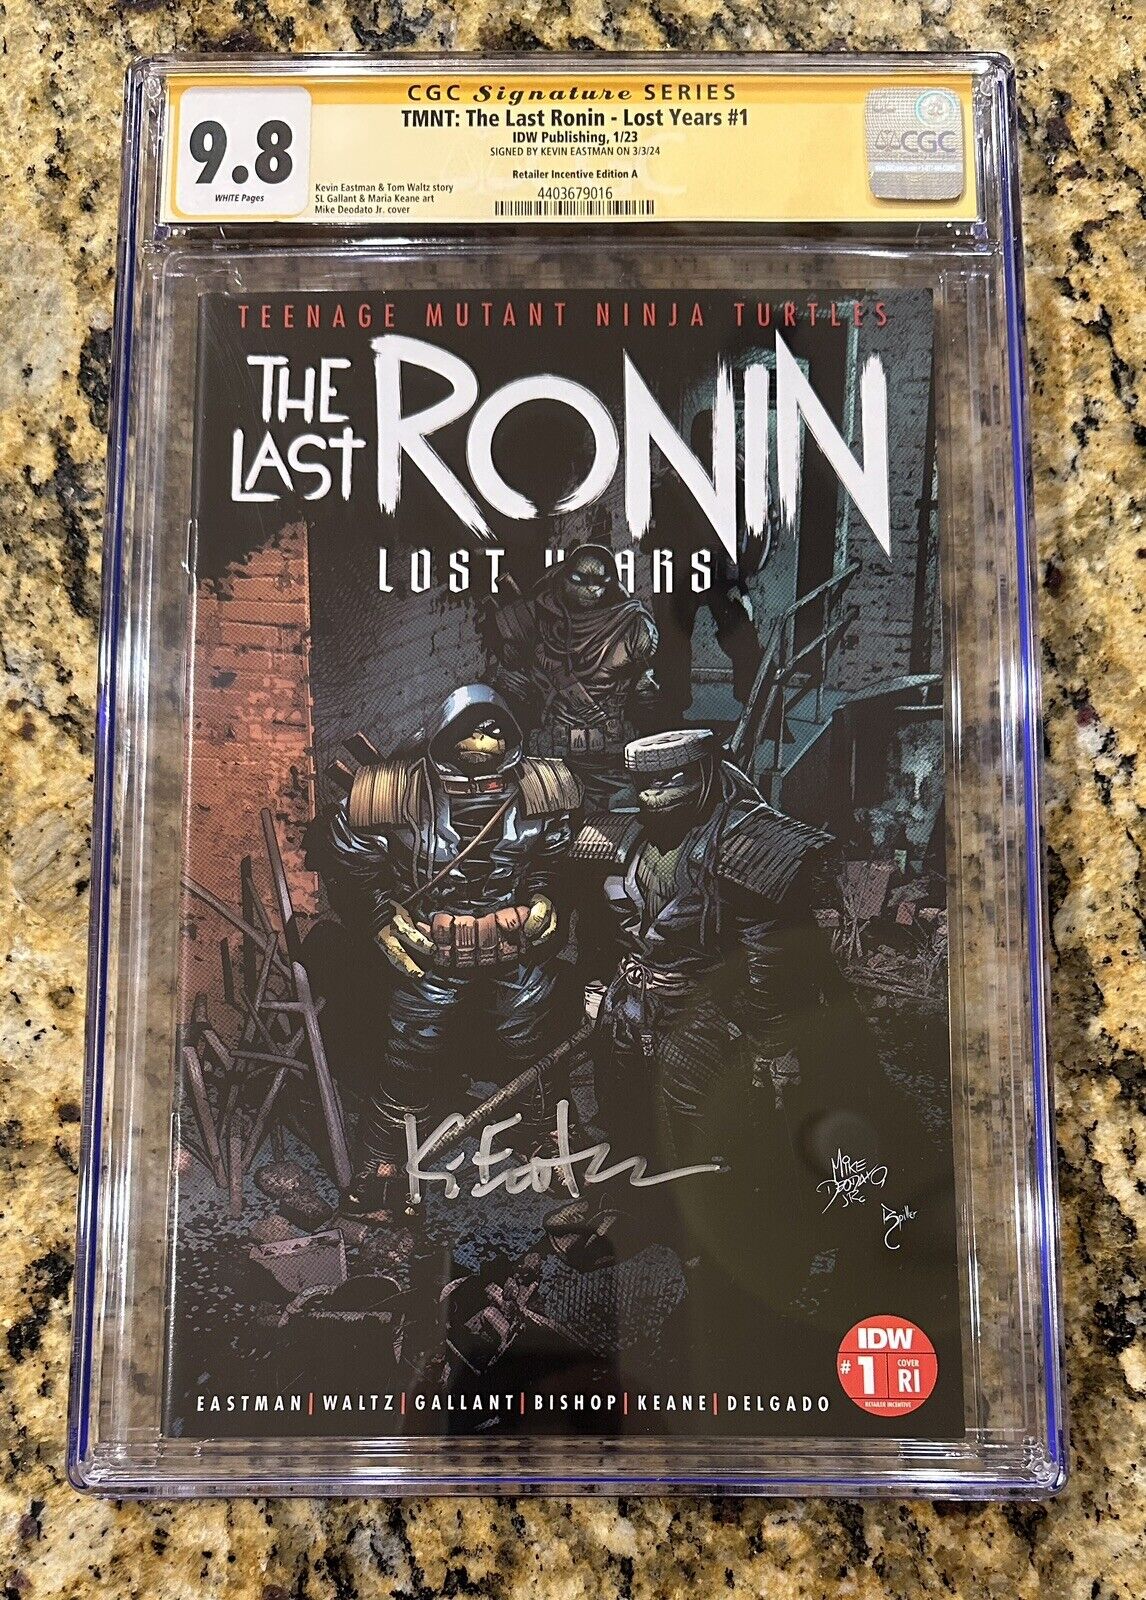 Kevin Eastman Signed TMNT Last Ronin Lost Years #1 - VARIANT CGC SS 9.8